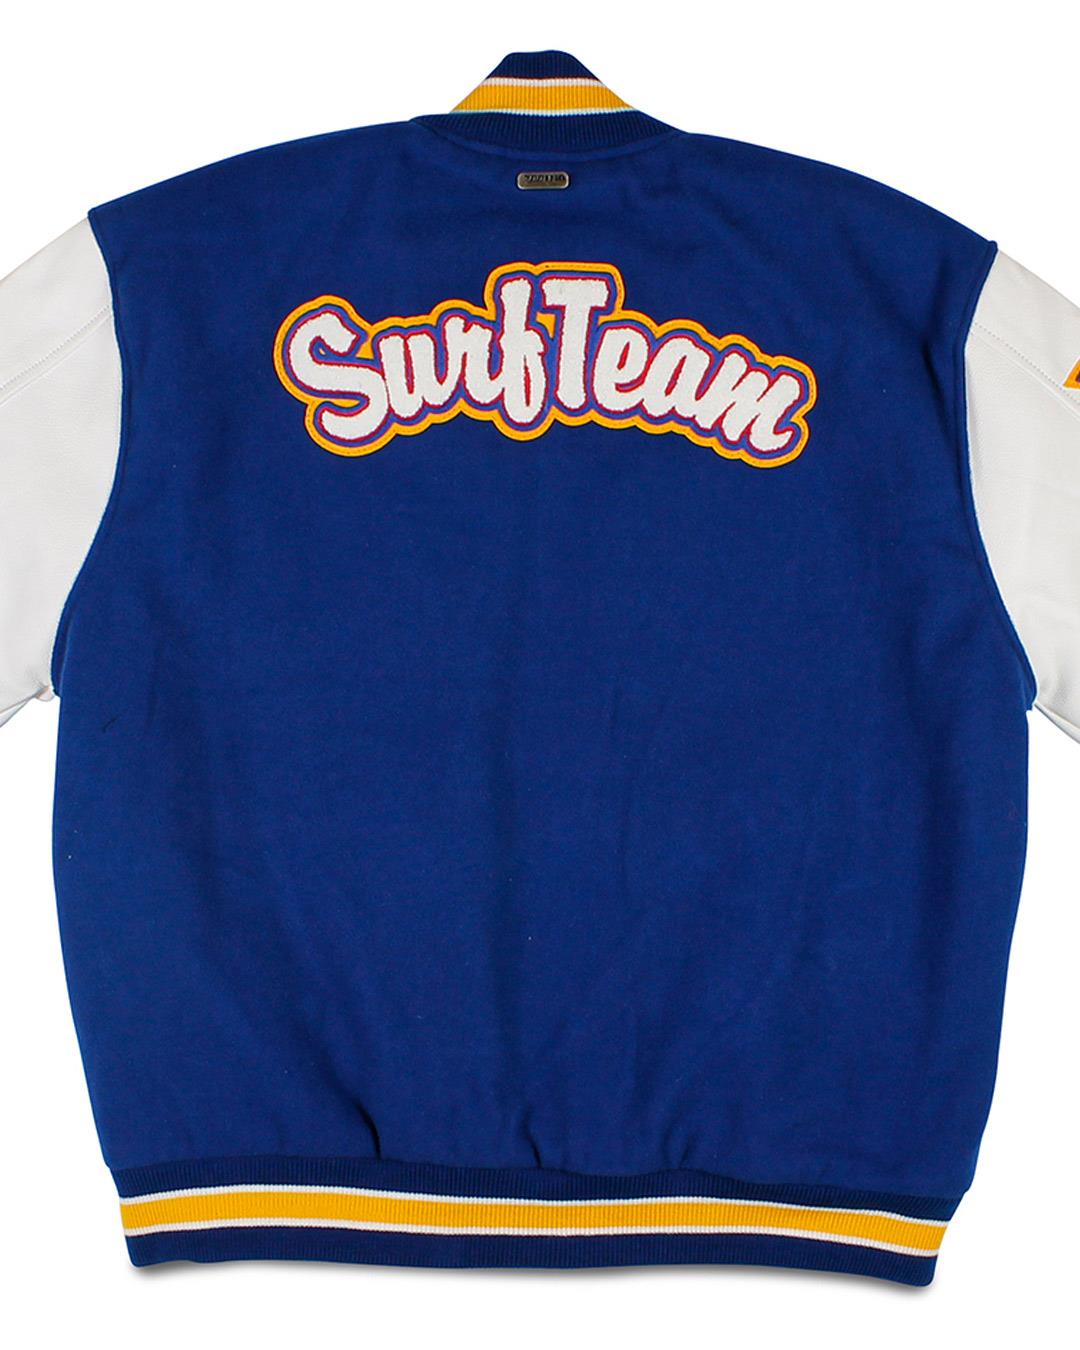 Fountain Valley High School Letterman Jacket, Fountain Valley CA - Back